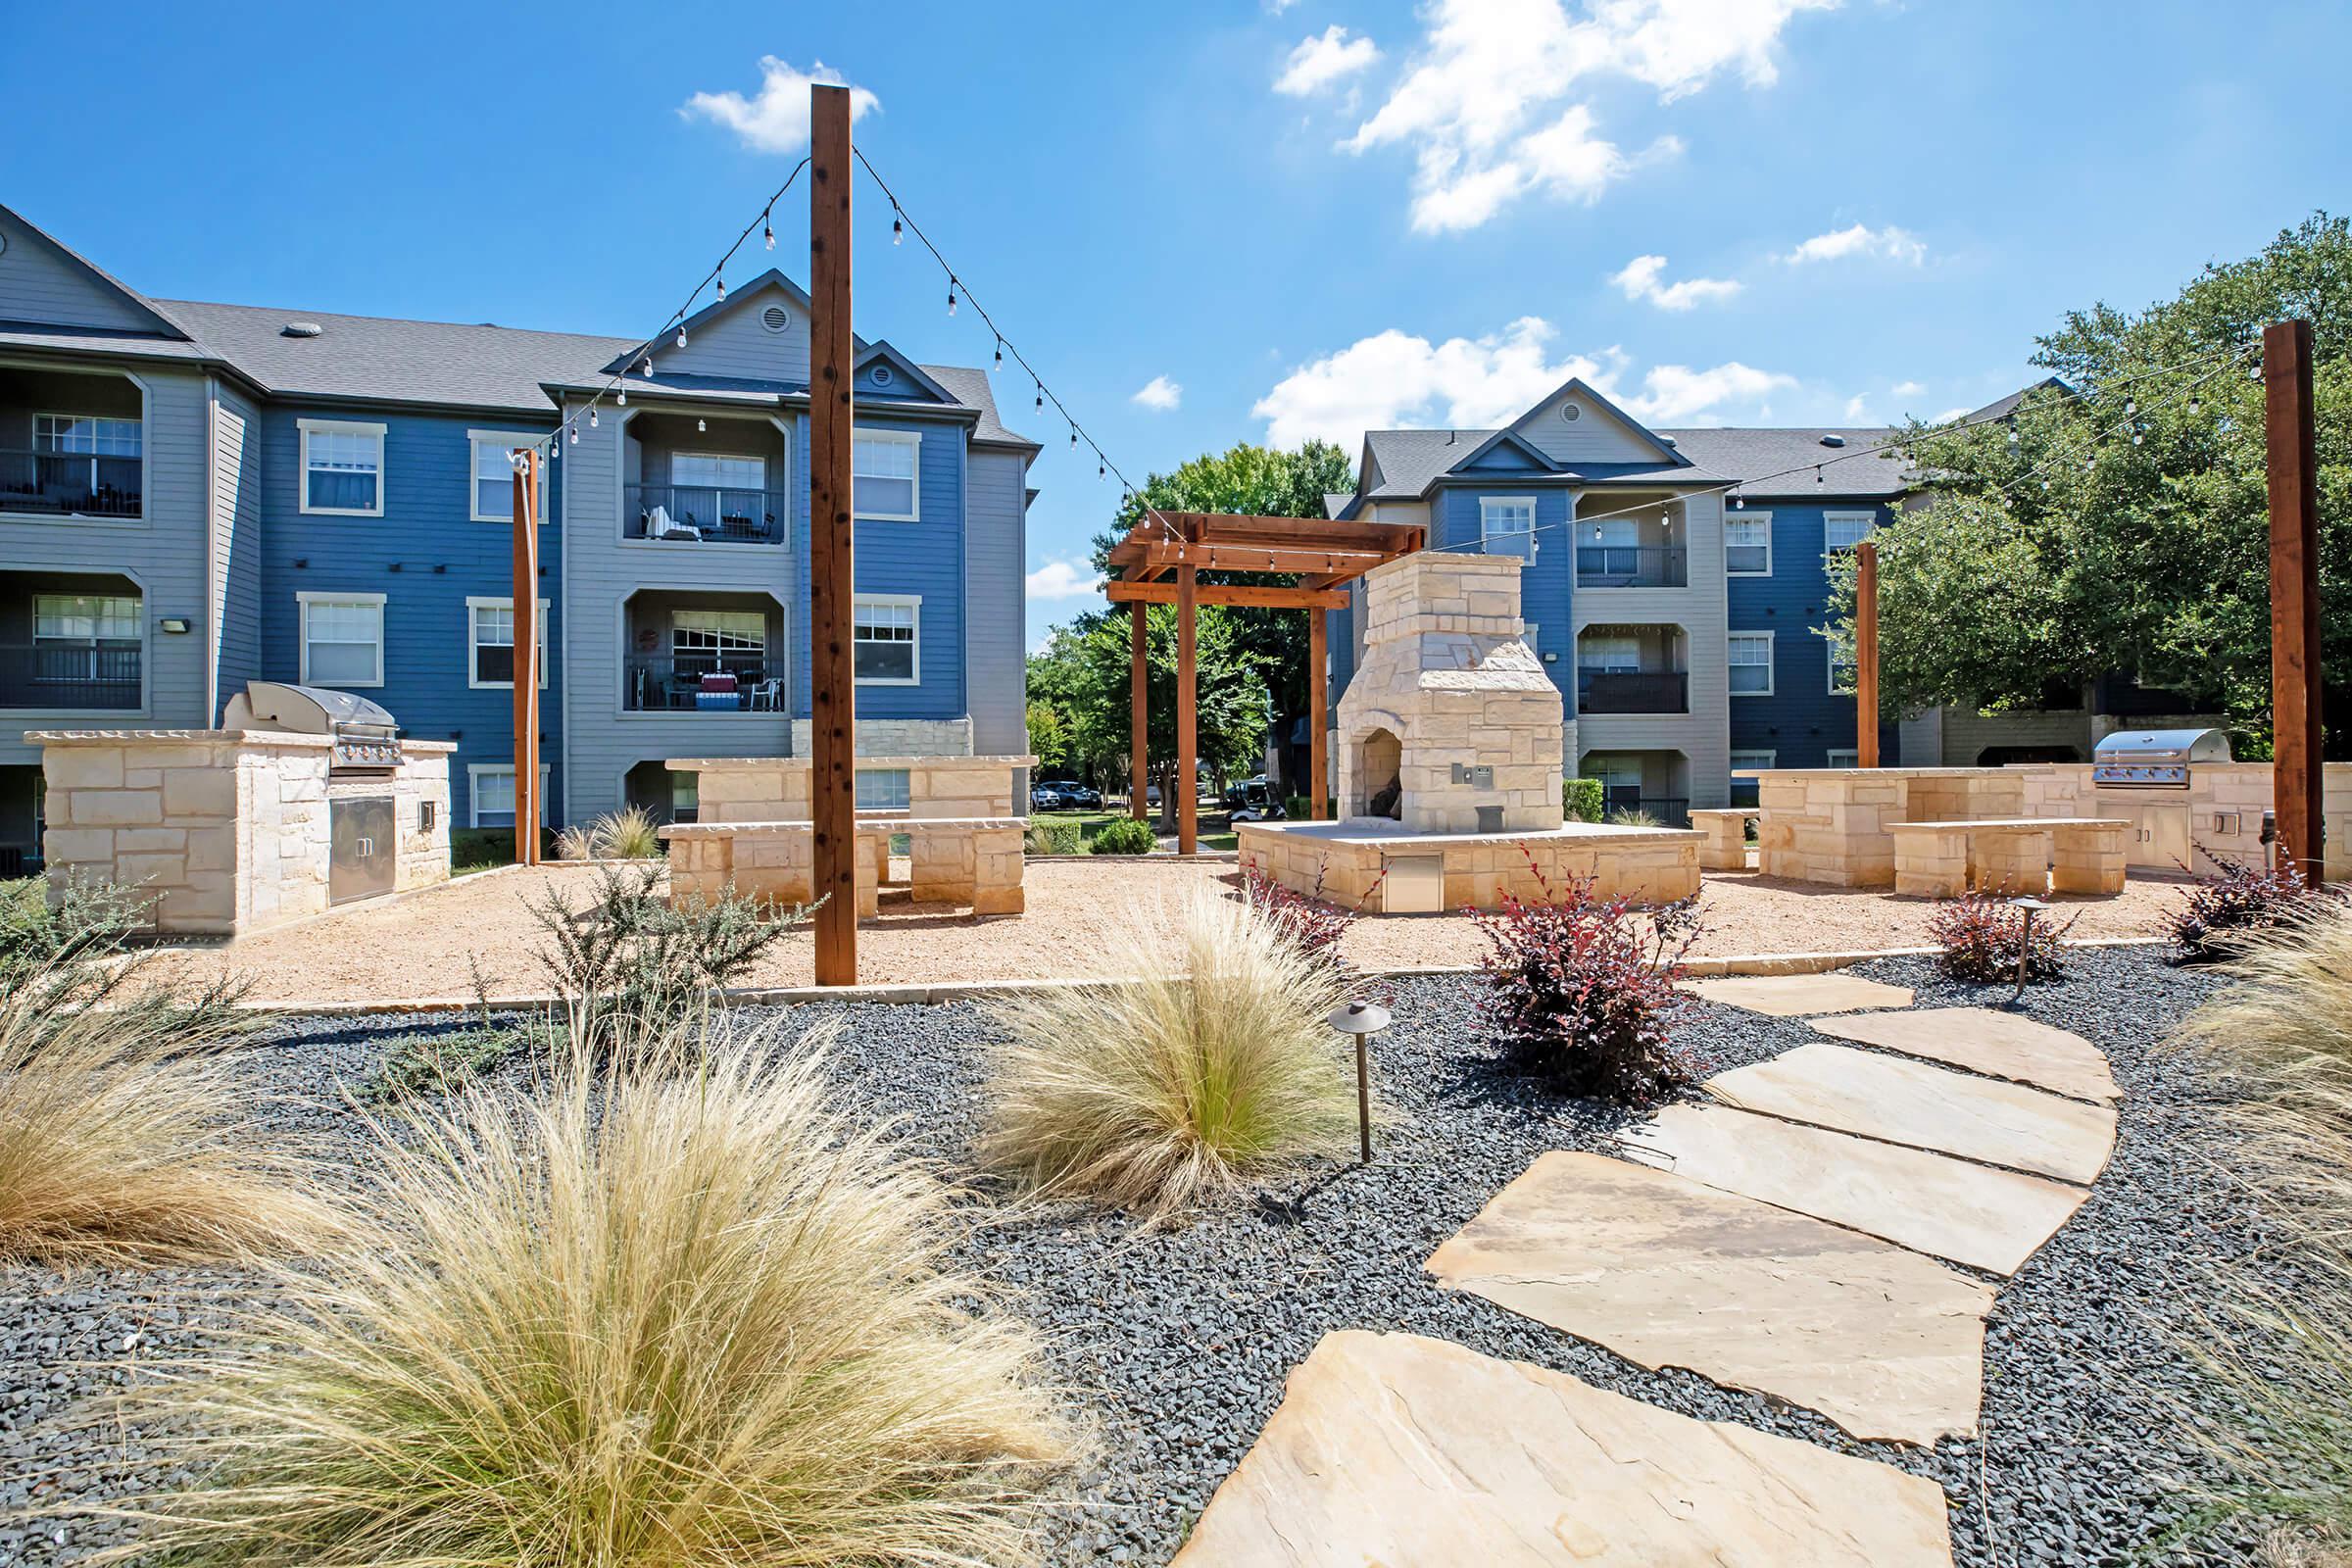 community courtyard with stainless steel barbecues